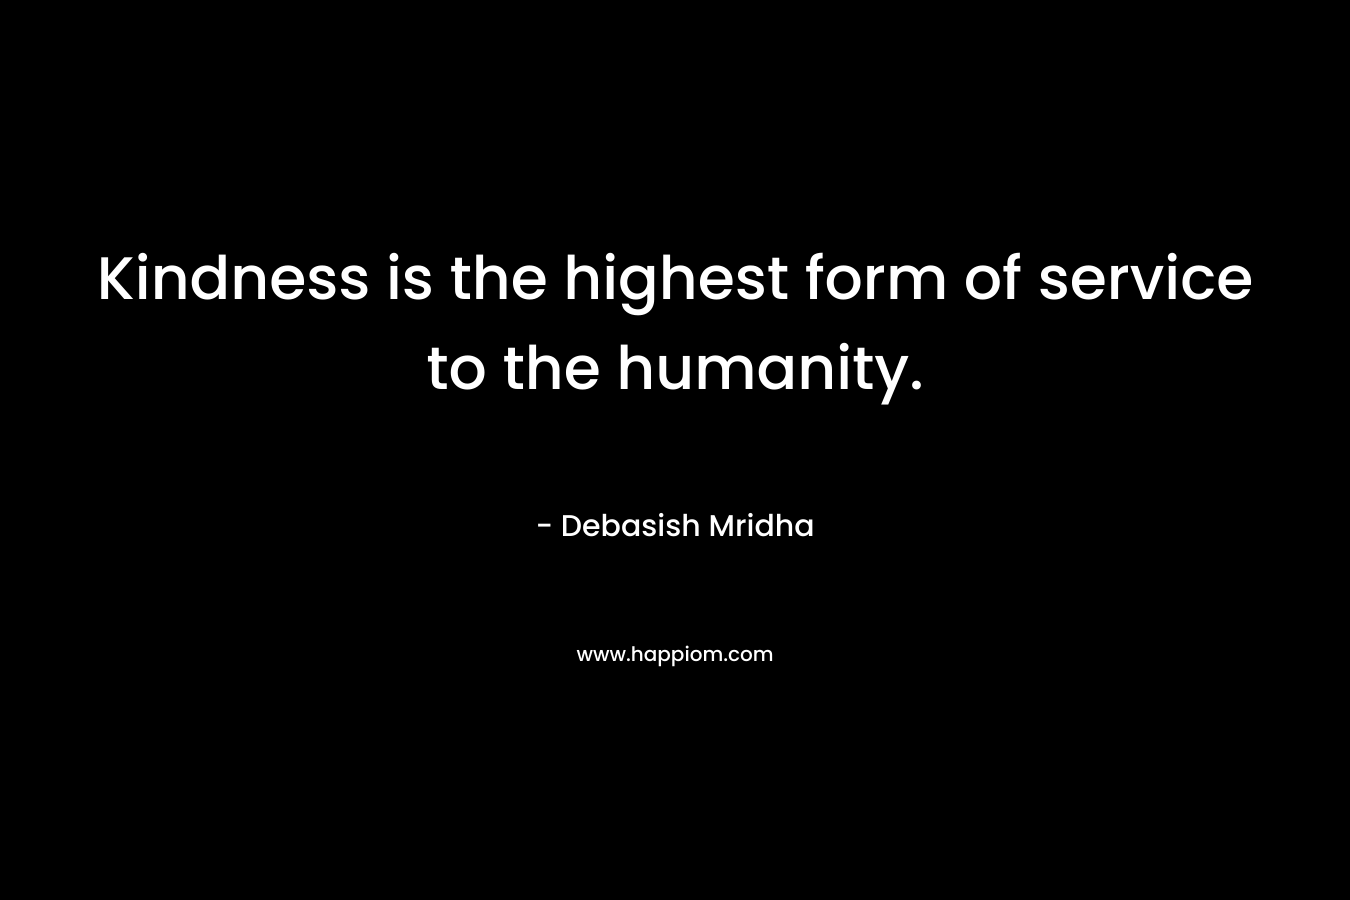 Kindness is the highest form of service to the humanity.